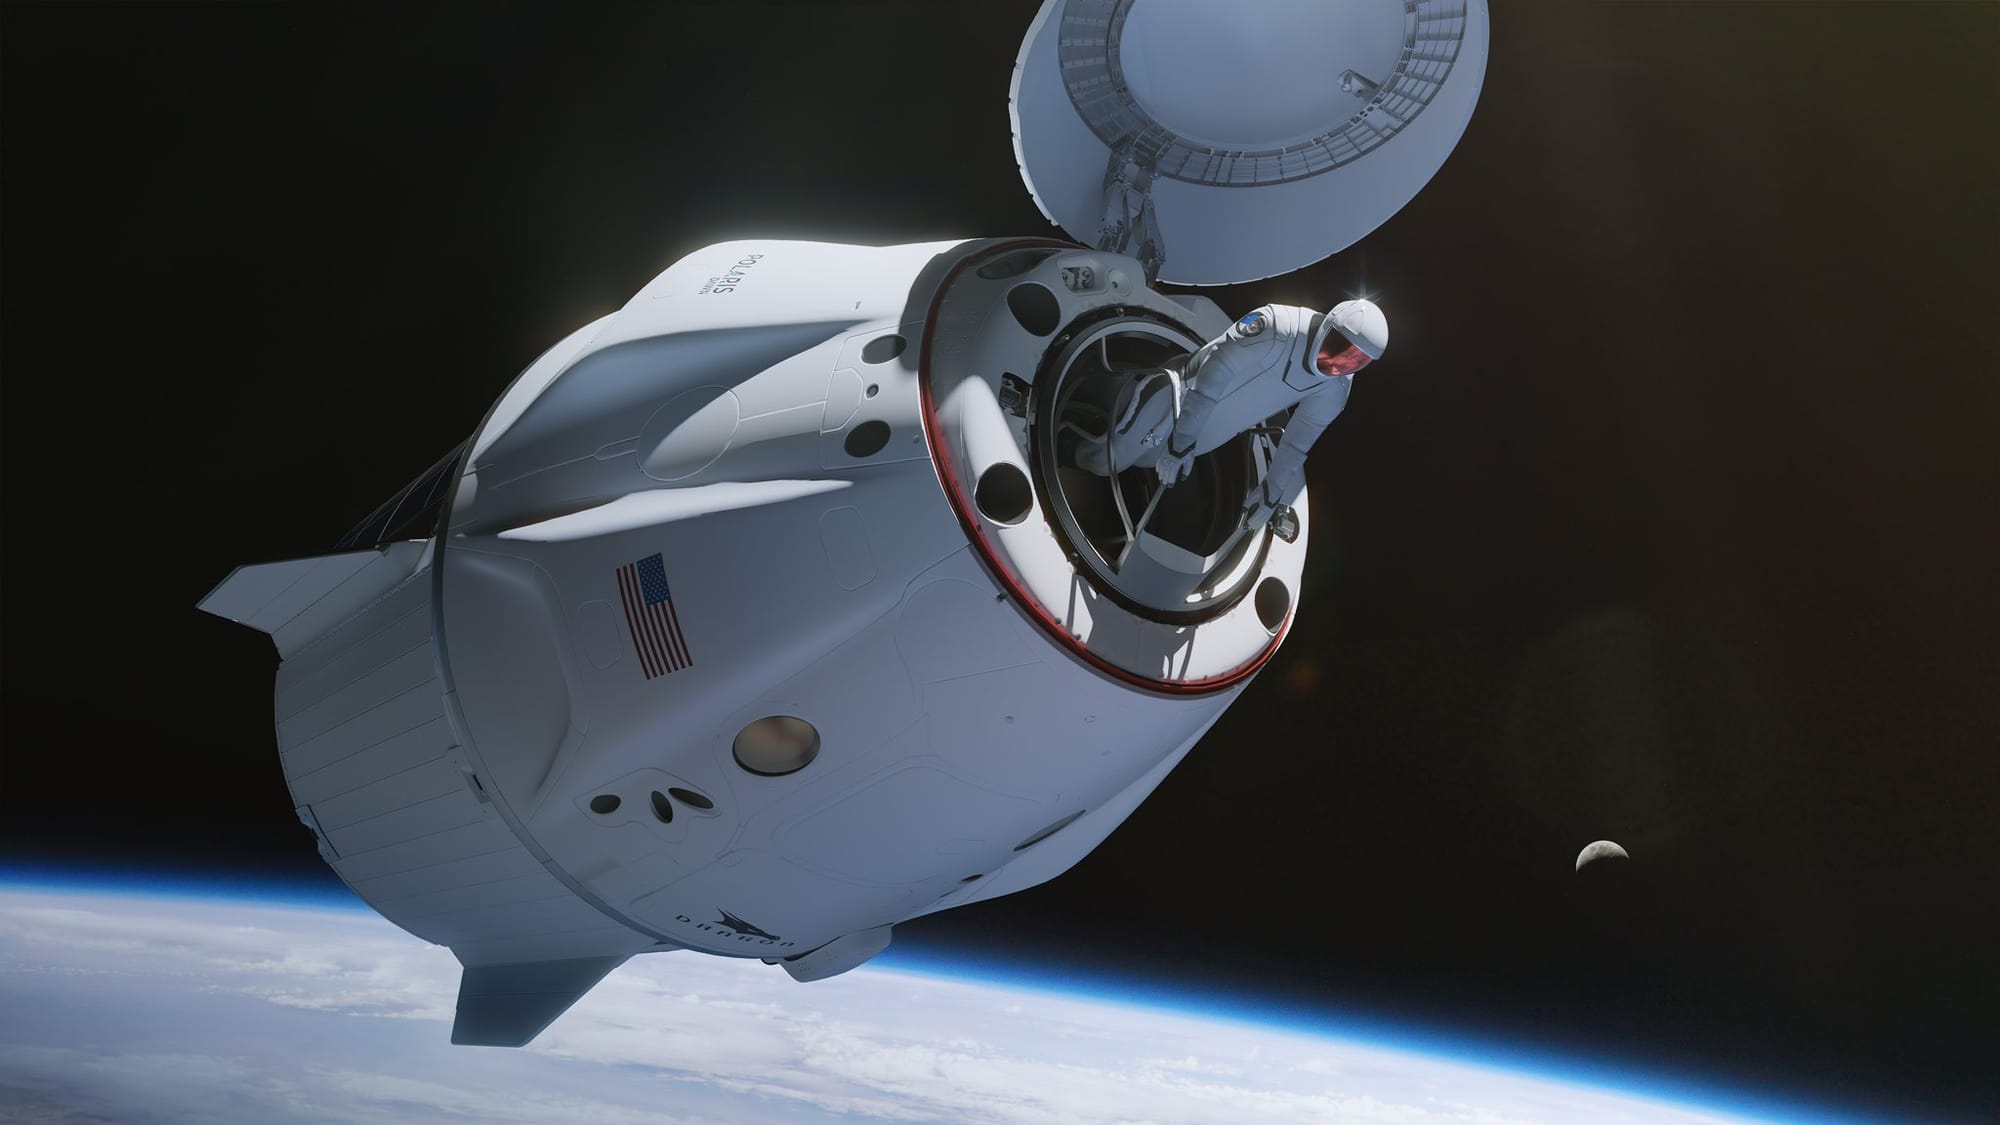 An astronaut performing an extravehicular activity from SpaceX's Crew Dragon spacecraft. ©SpaceX/Polaris Program